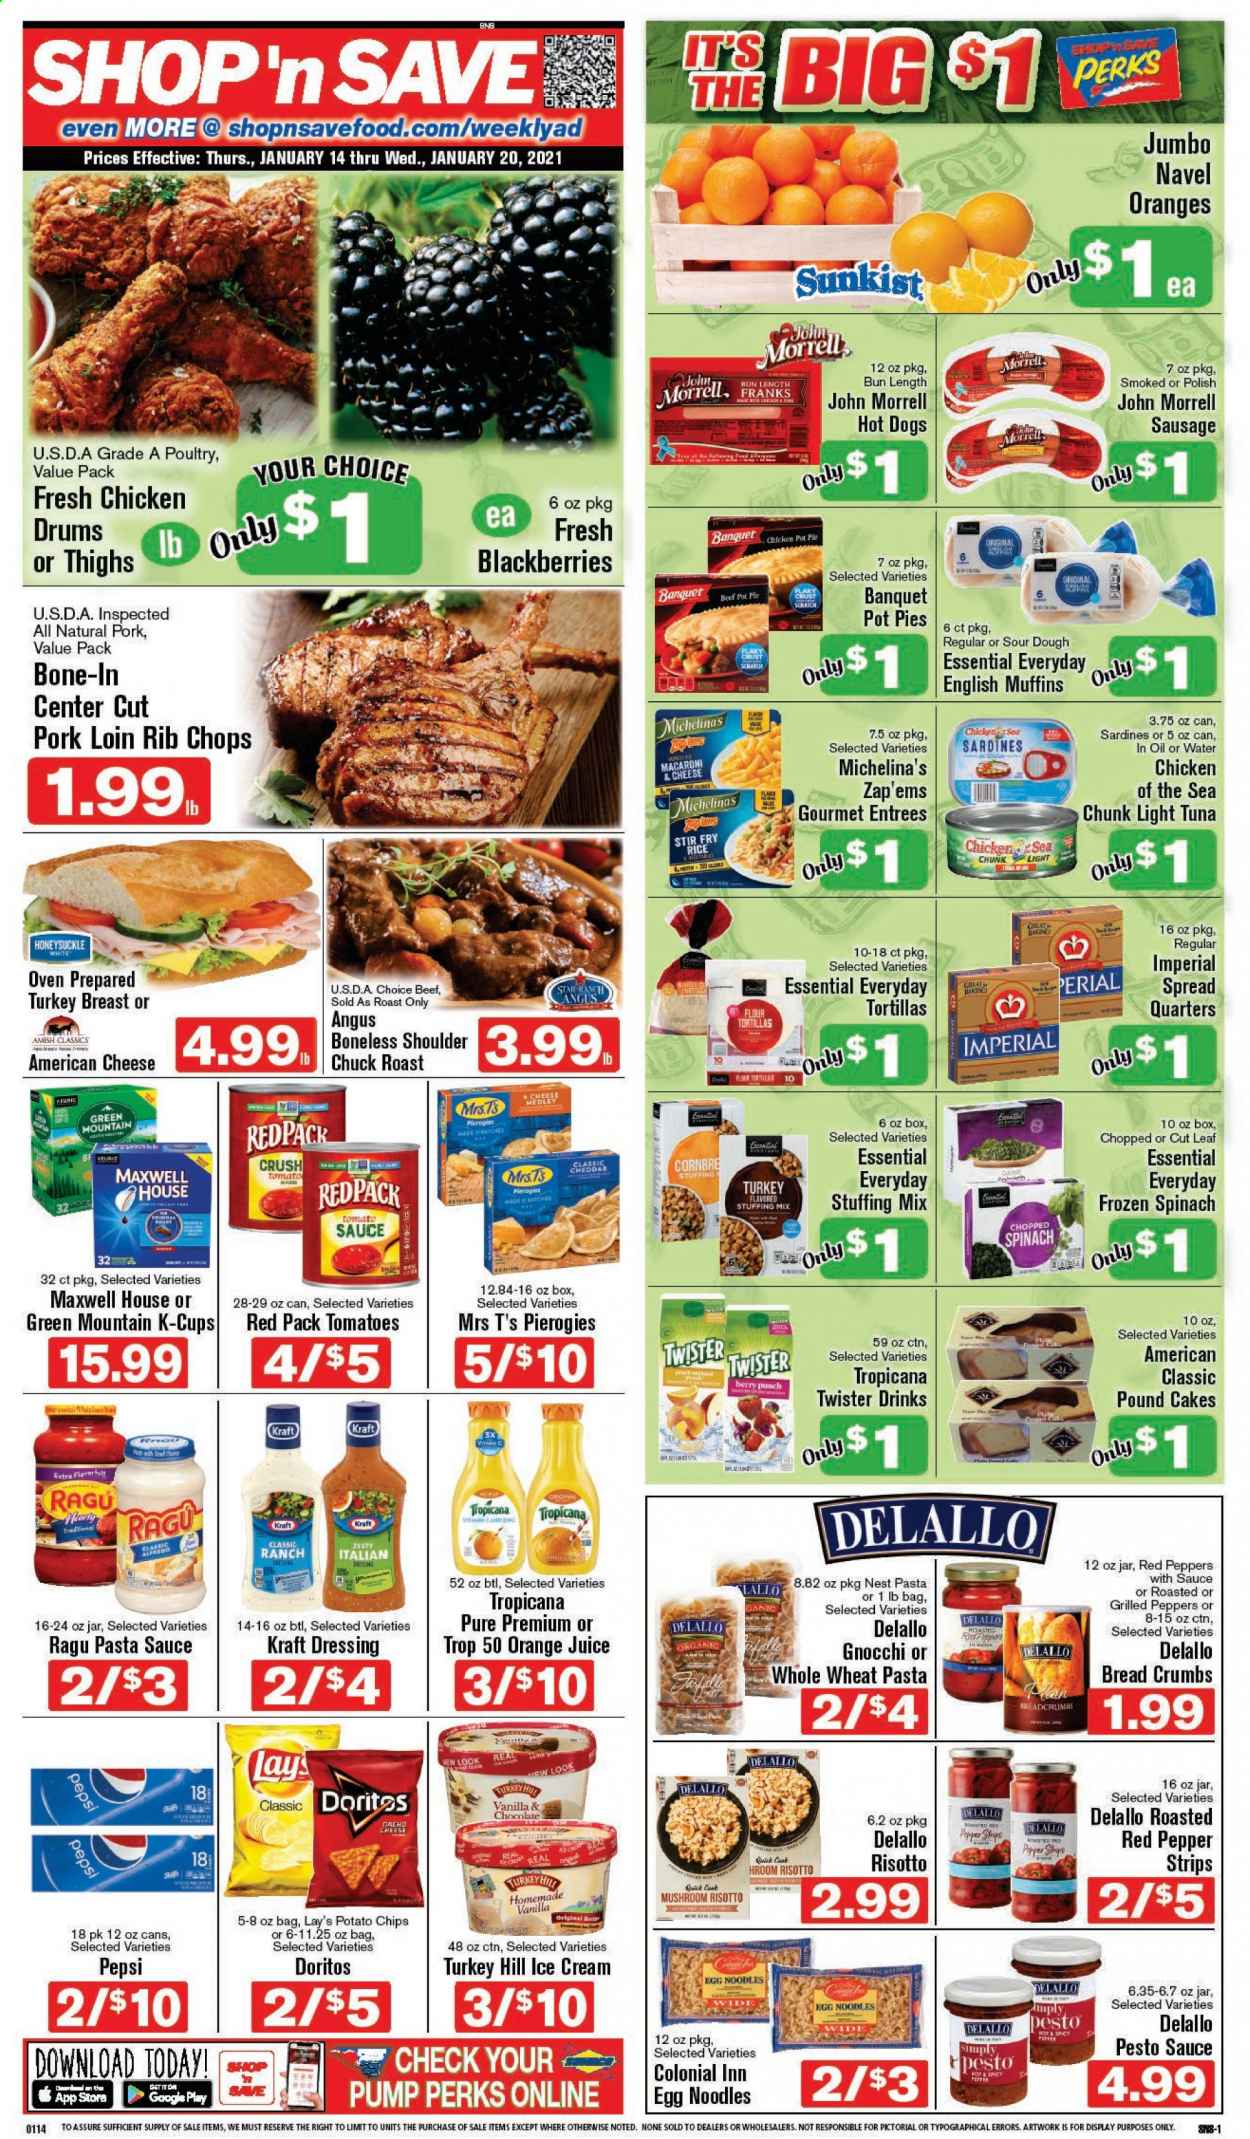 thumbnail - Shop ‘n Save Flyer - 01/14/2021 - 01/20/2021 - Sales products - blackberries, bread, tortillas, pot pie, cake, pie, muffin, breadcrumbs, turkey breast, beef meat, chuck roast, pork loin, pork meat, rib chops, sardines, tuna, english muffins, gnocchi, macaroni & cheese, risotto, hot dog, Kraft®, sausage, american cheese, cheddar, ice cream, spinach, strips, chocolate, Doritos, potato chips, Lay’s, stuffing mix, light tuna, Chicken of the Sea, rice, egg noodles, noodles, tomato sauce, pesto, pasta sauce, dressing, ragu, Pepsi, orange juice, juice, Tropicana Twister, Maxwell House, coffee capsules, K-Cups, Green Mountain, punch. Page 1.